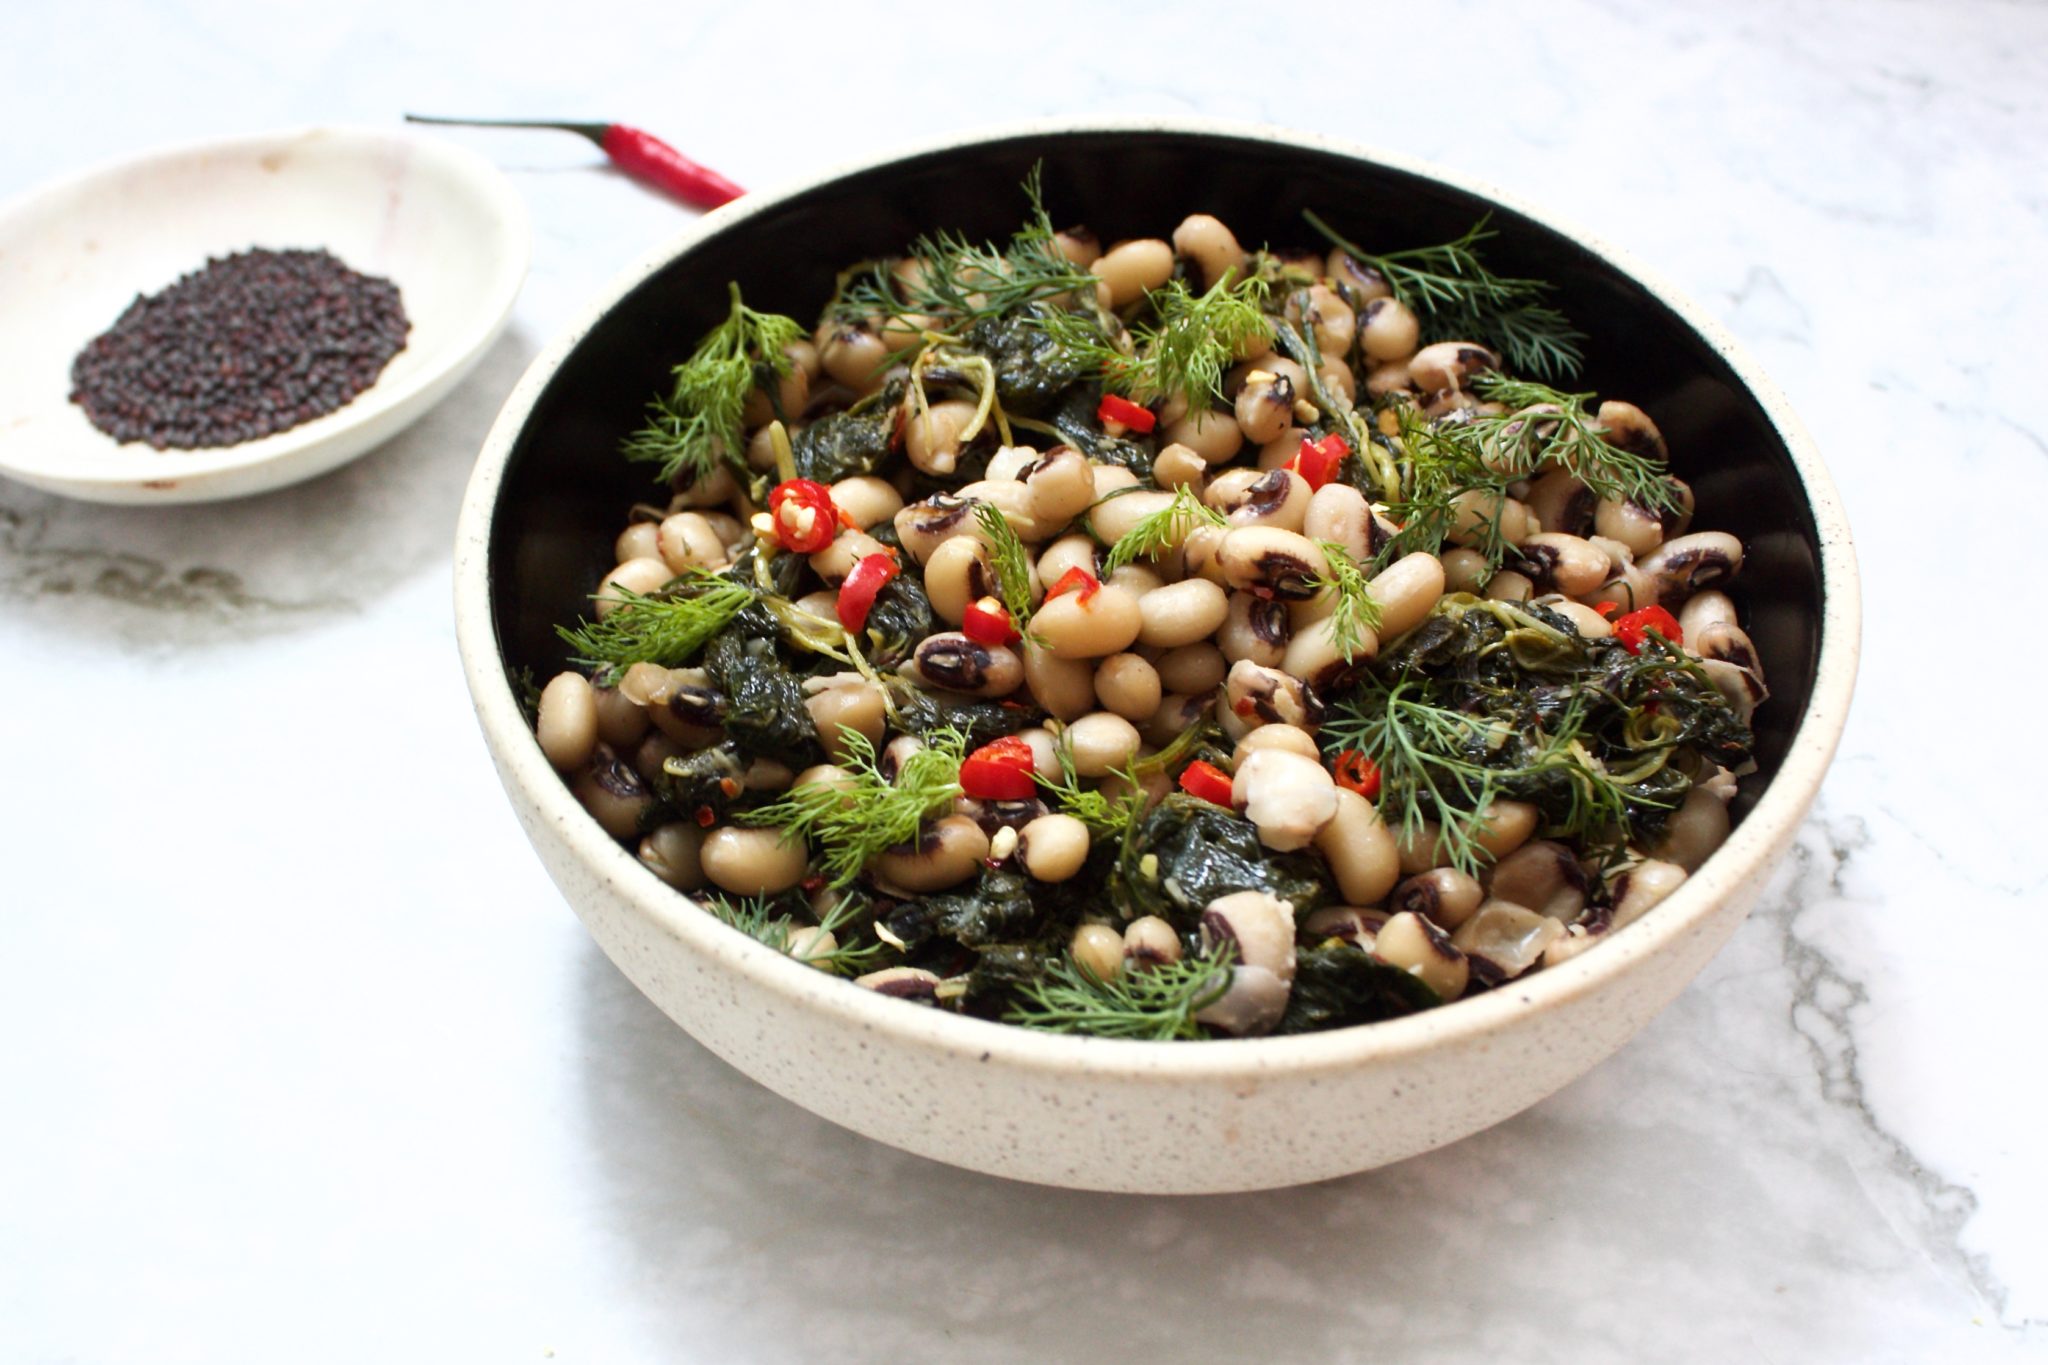 Herby Black Eyed Peas With Chicken and Spinach